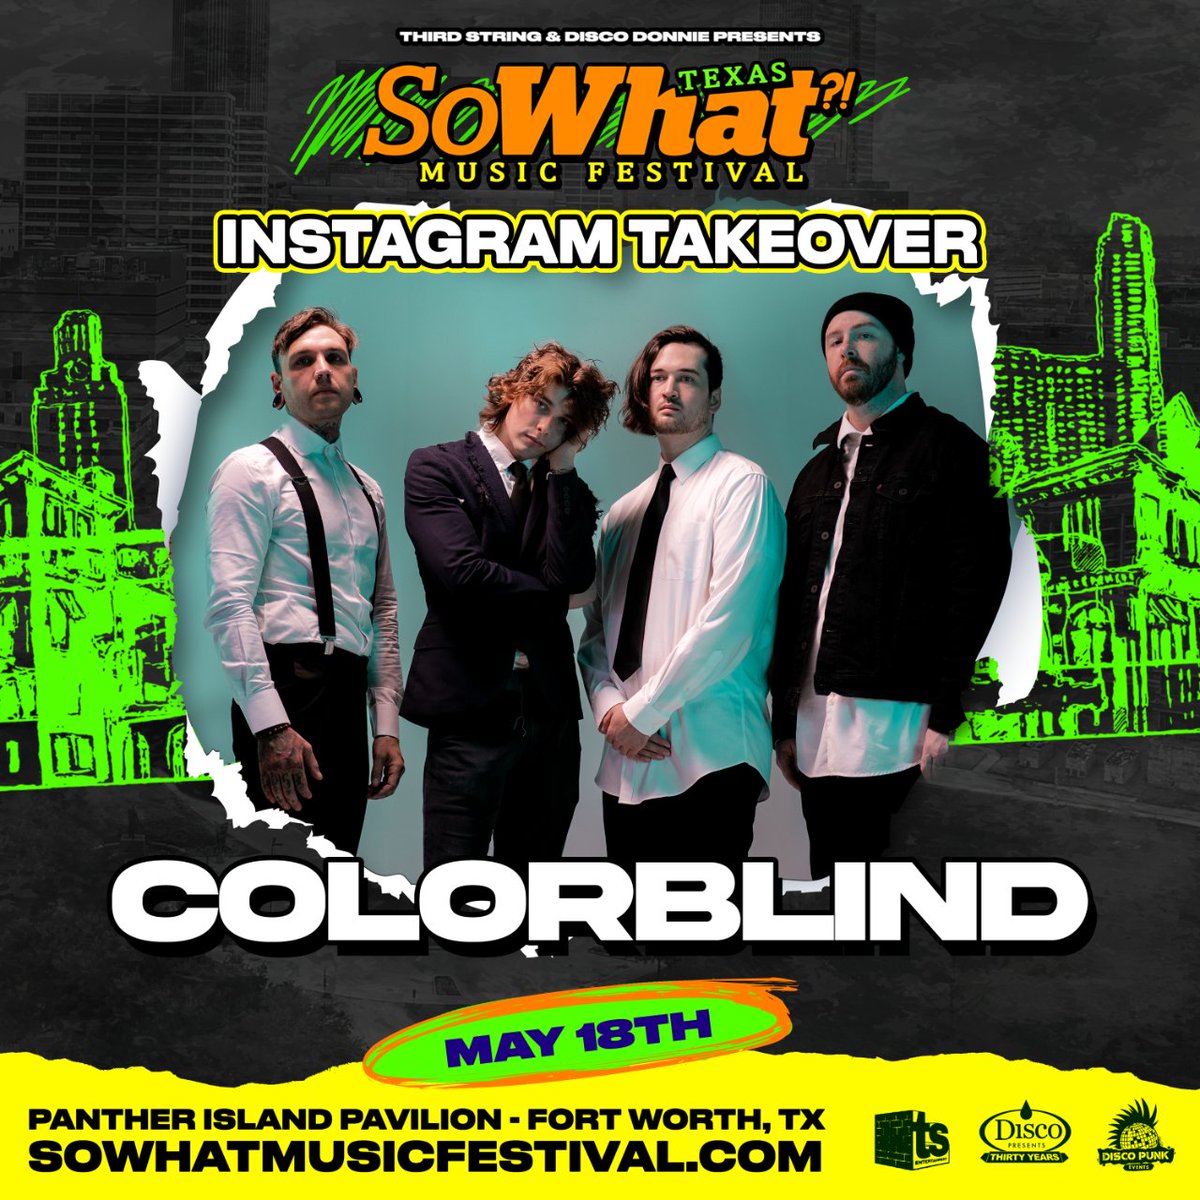 Save the date and call it an invitation 📩  @colorblindtx is taking over our Instagram for a day! Be sure you tune in this Saturday to catch some behind the scenes of tour life, Q&A, and more ❣️ instagram.com/sowhatmusicfes…